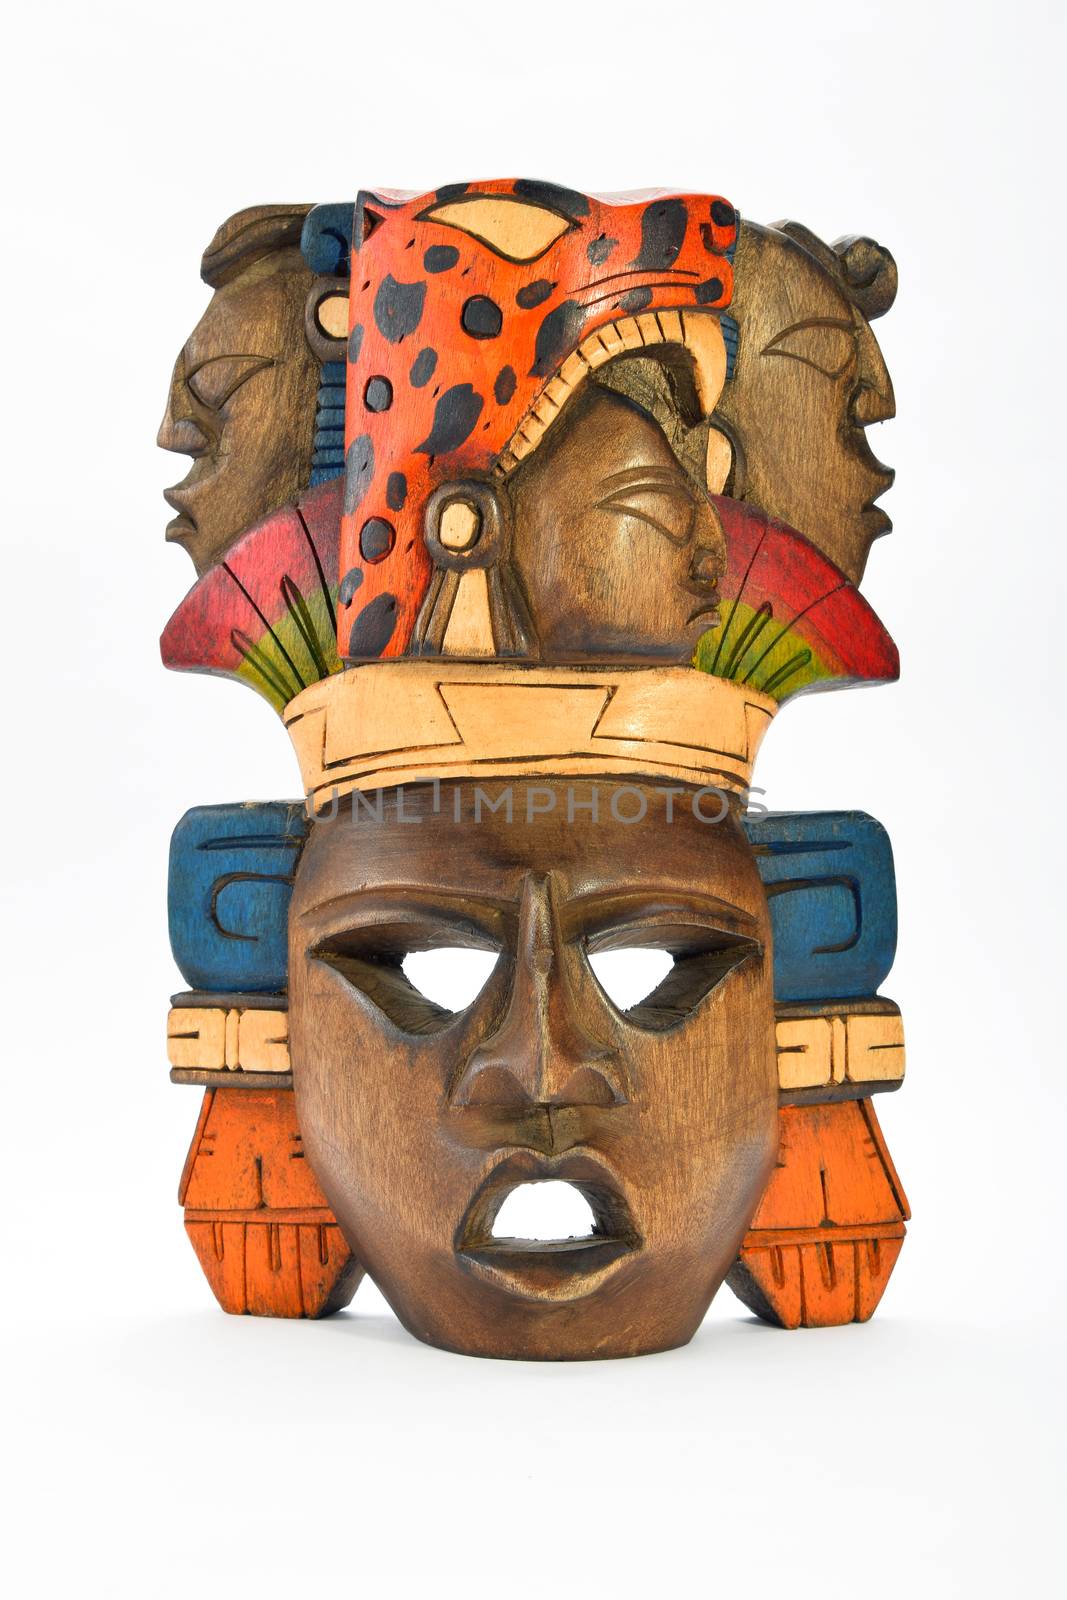 Indian Mayan Aztec wooden painted mask with roaring jaguar and human profiles isolated on white background